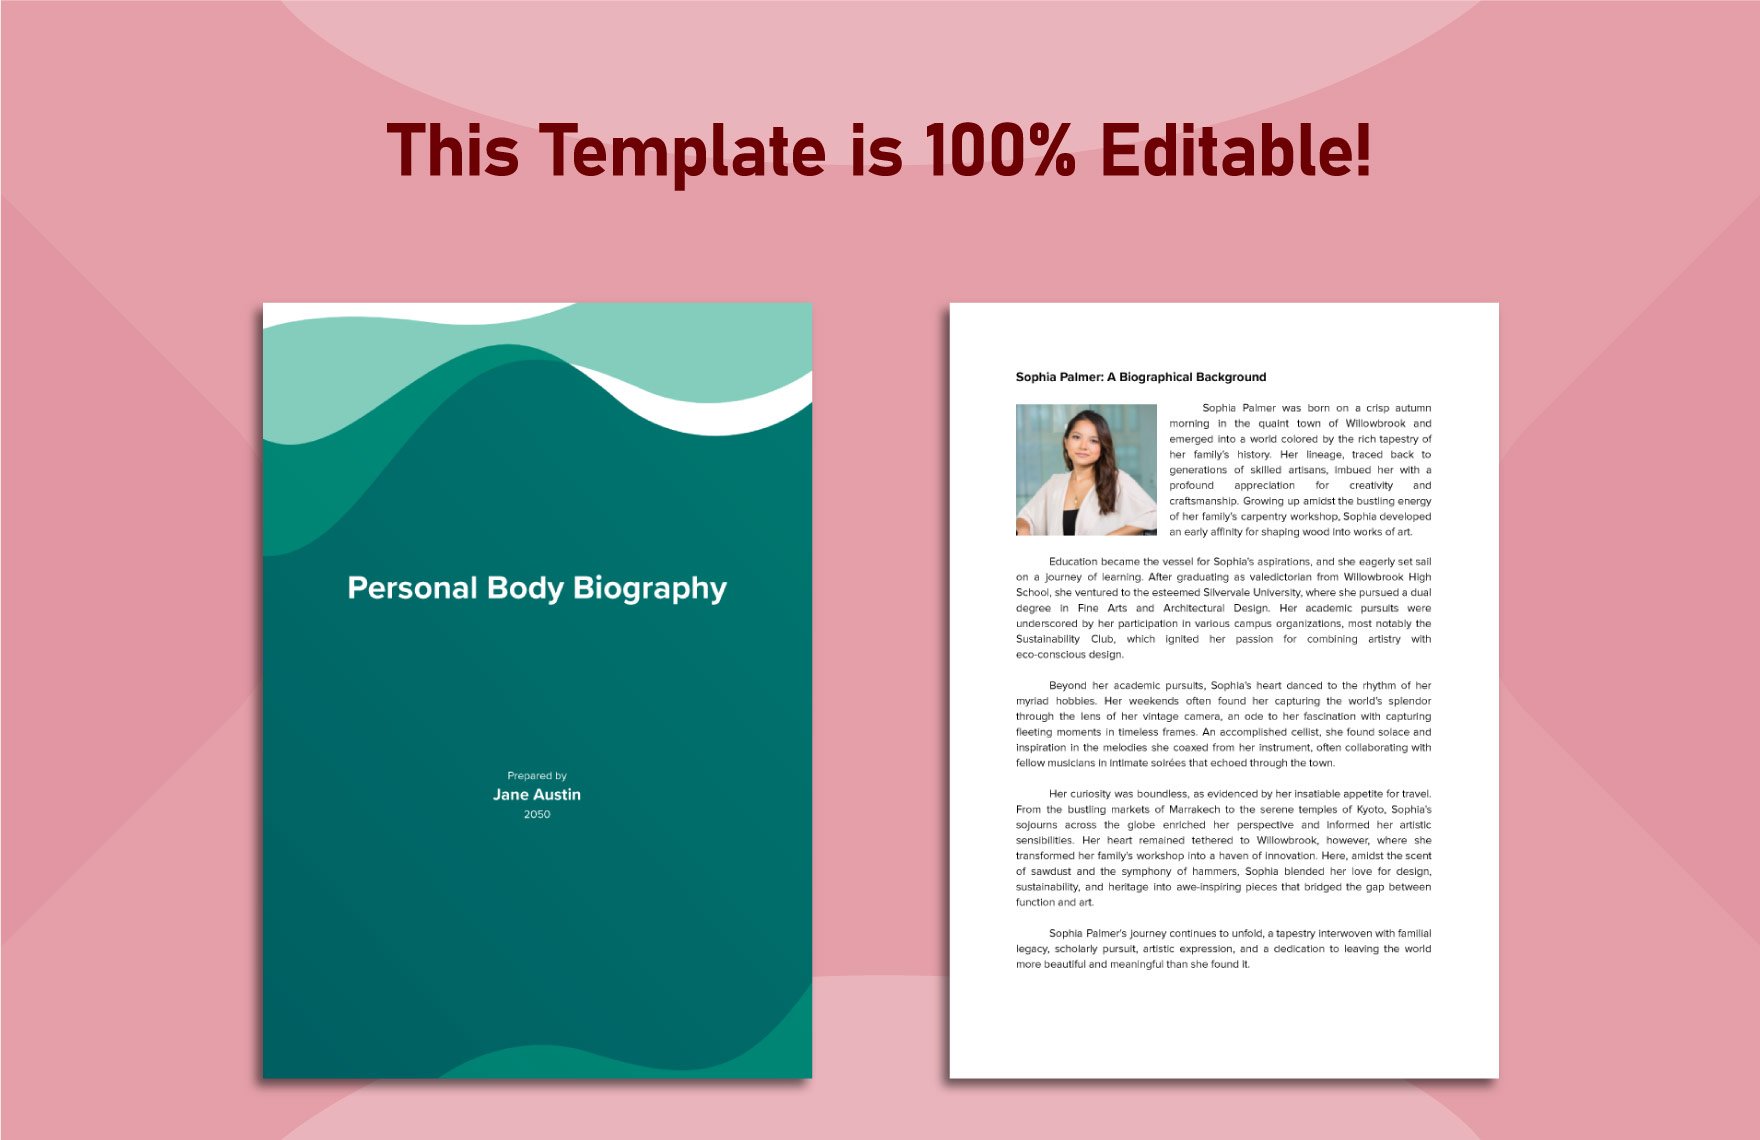 Personal Body Biography Template